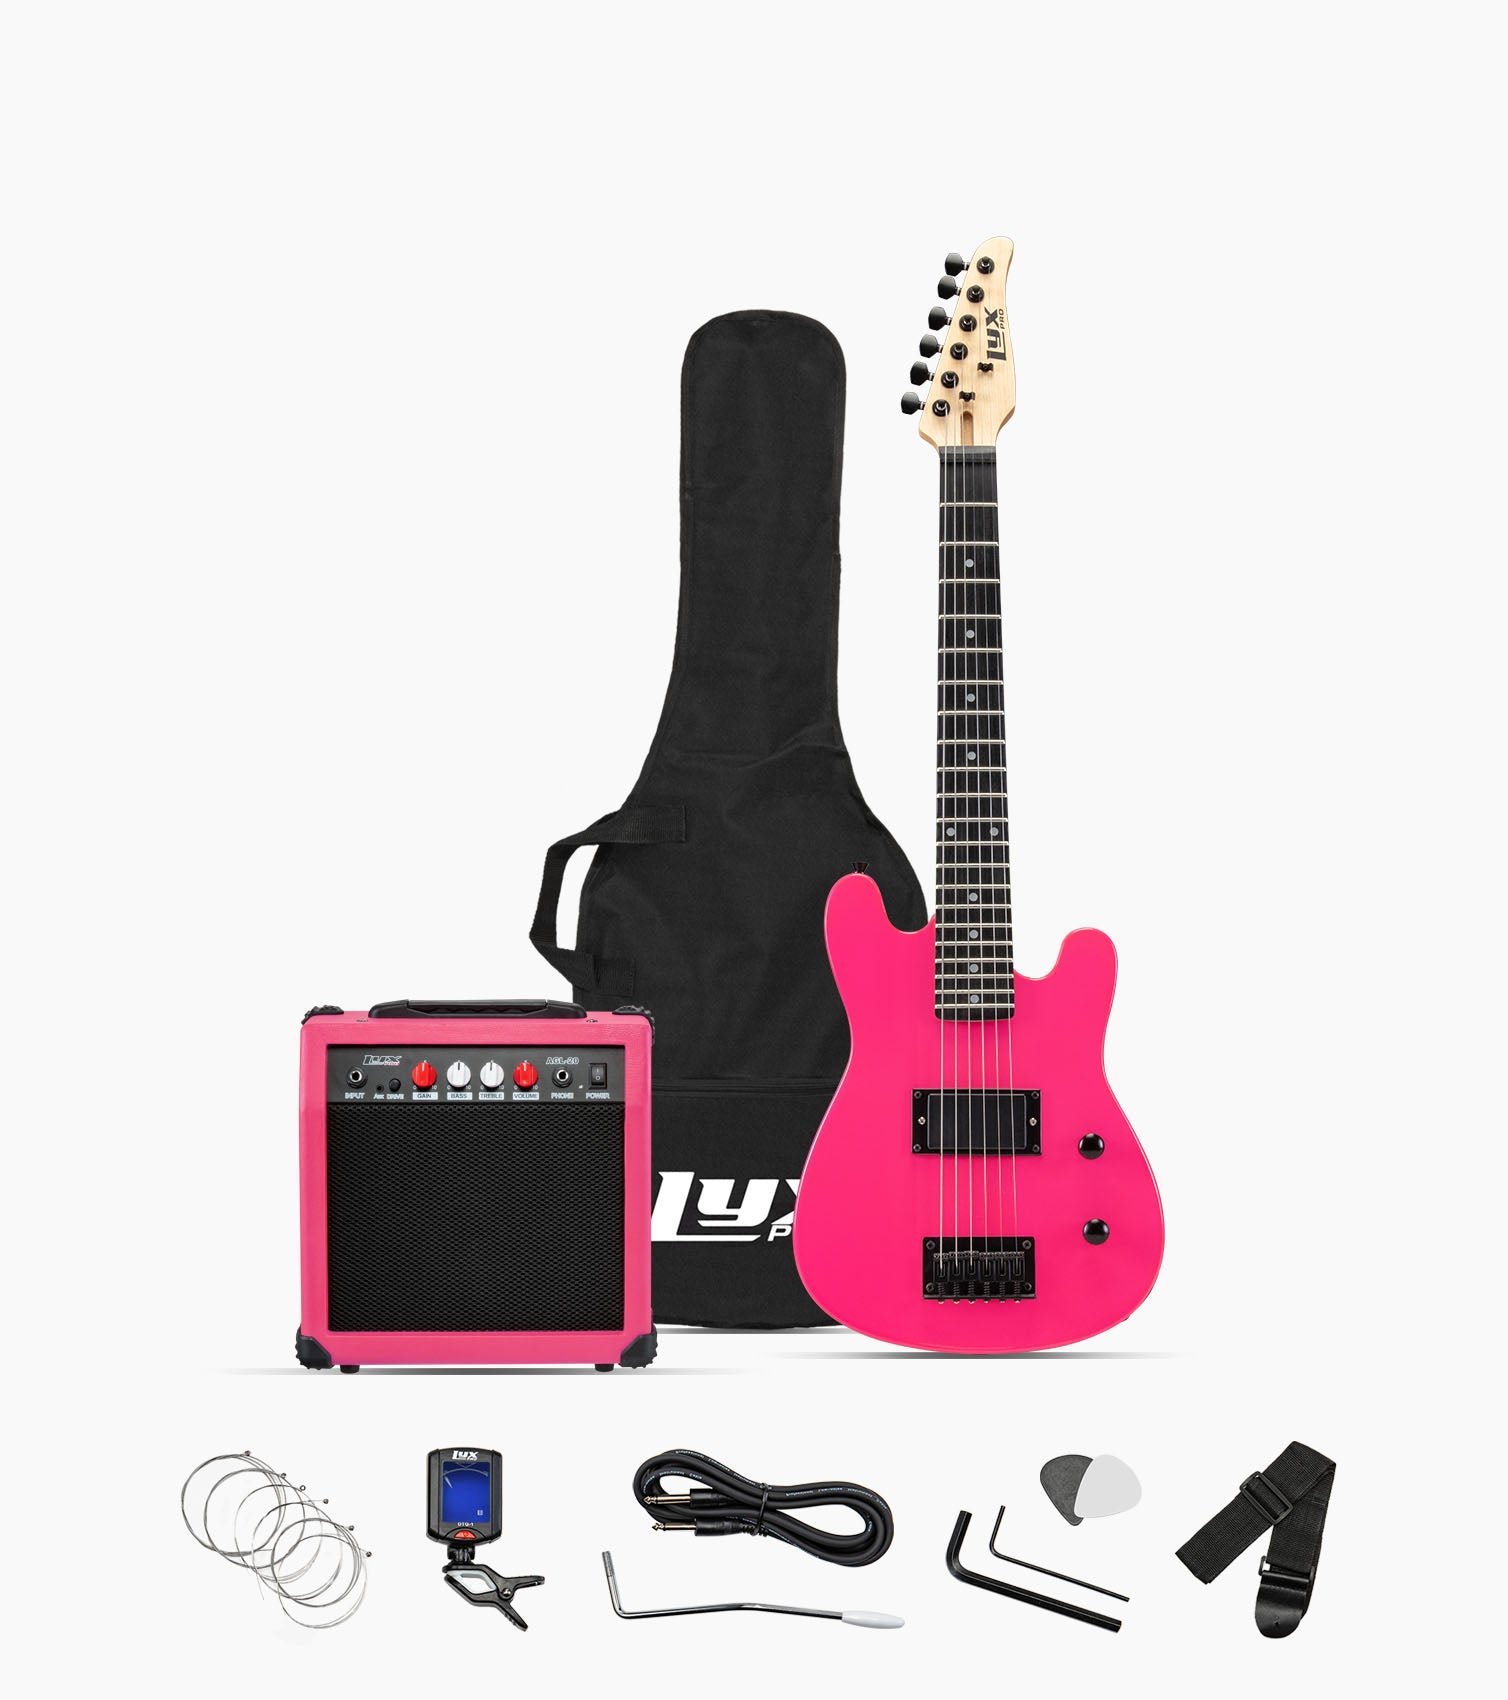 CS Series 30 Beginner Electric Guitar Kit by LyxPro